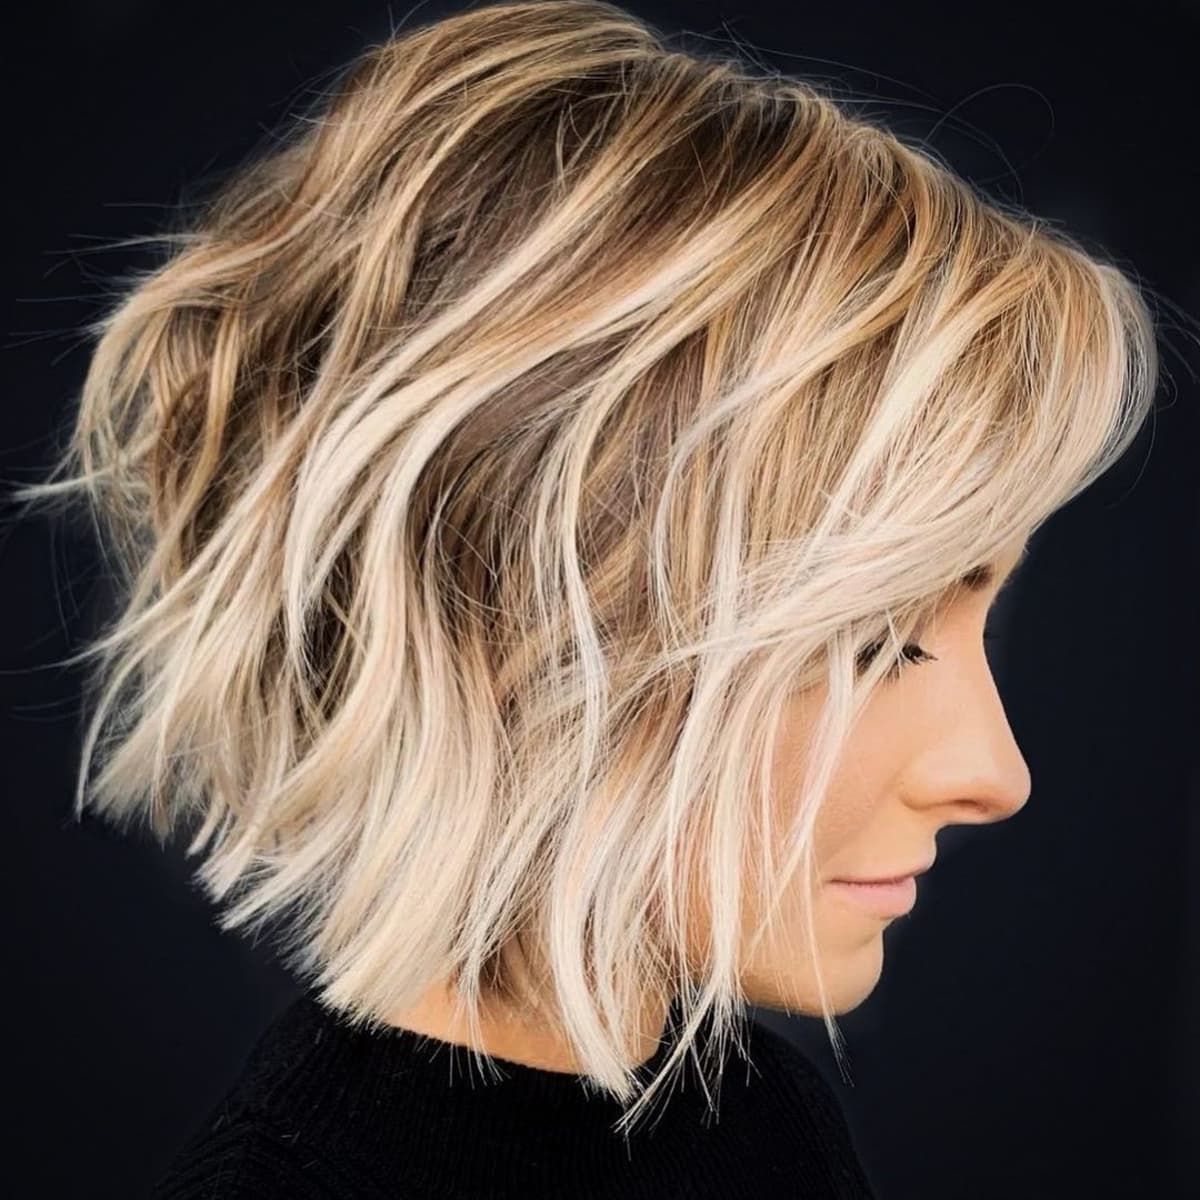 46 Most Popular Short Wavy Hair Styles & Haircuts Right Now With Short Hairstyles With Loose Curls (View 14 of 20)